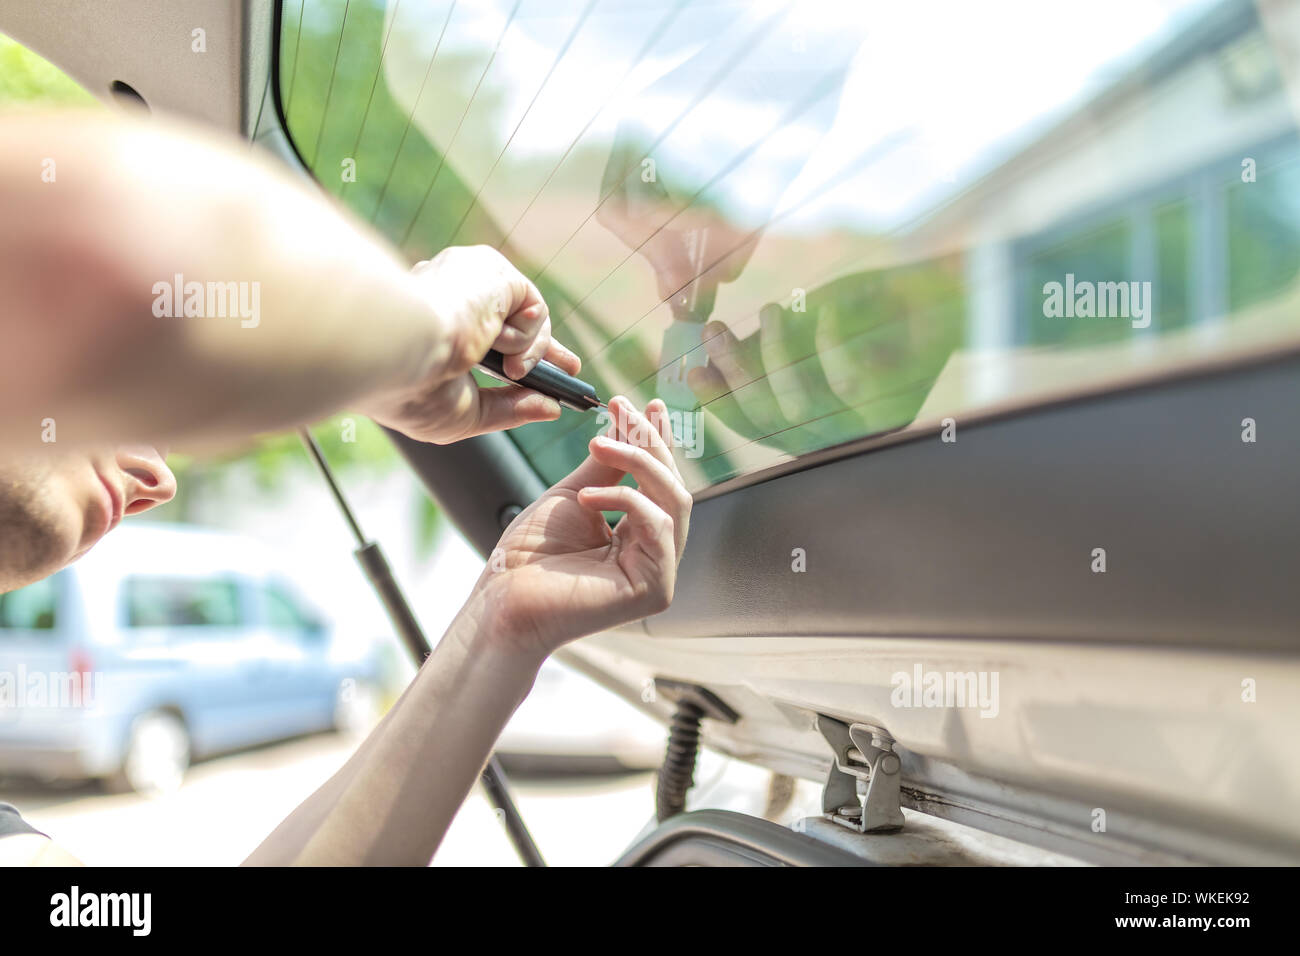 Close up shot hands of man removing old car window film Stock Photo